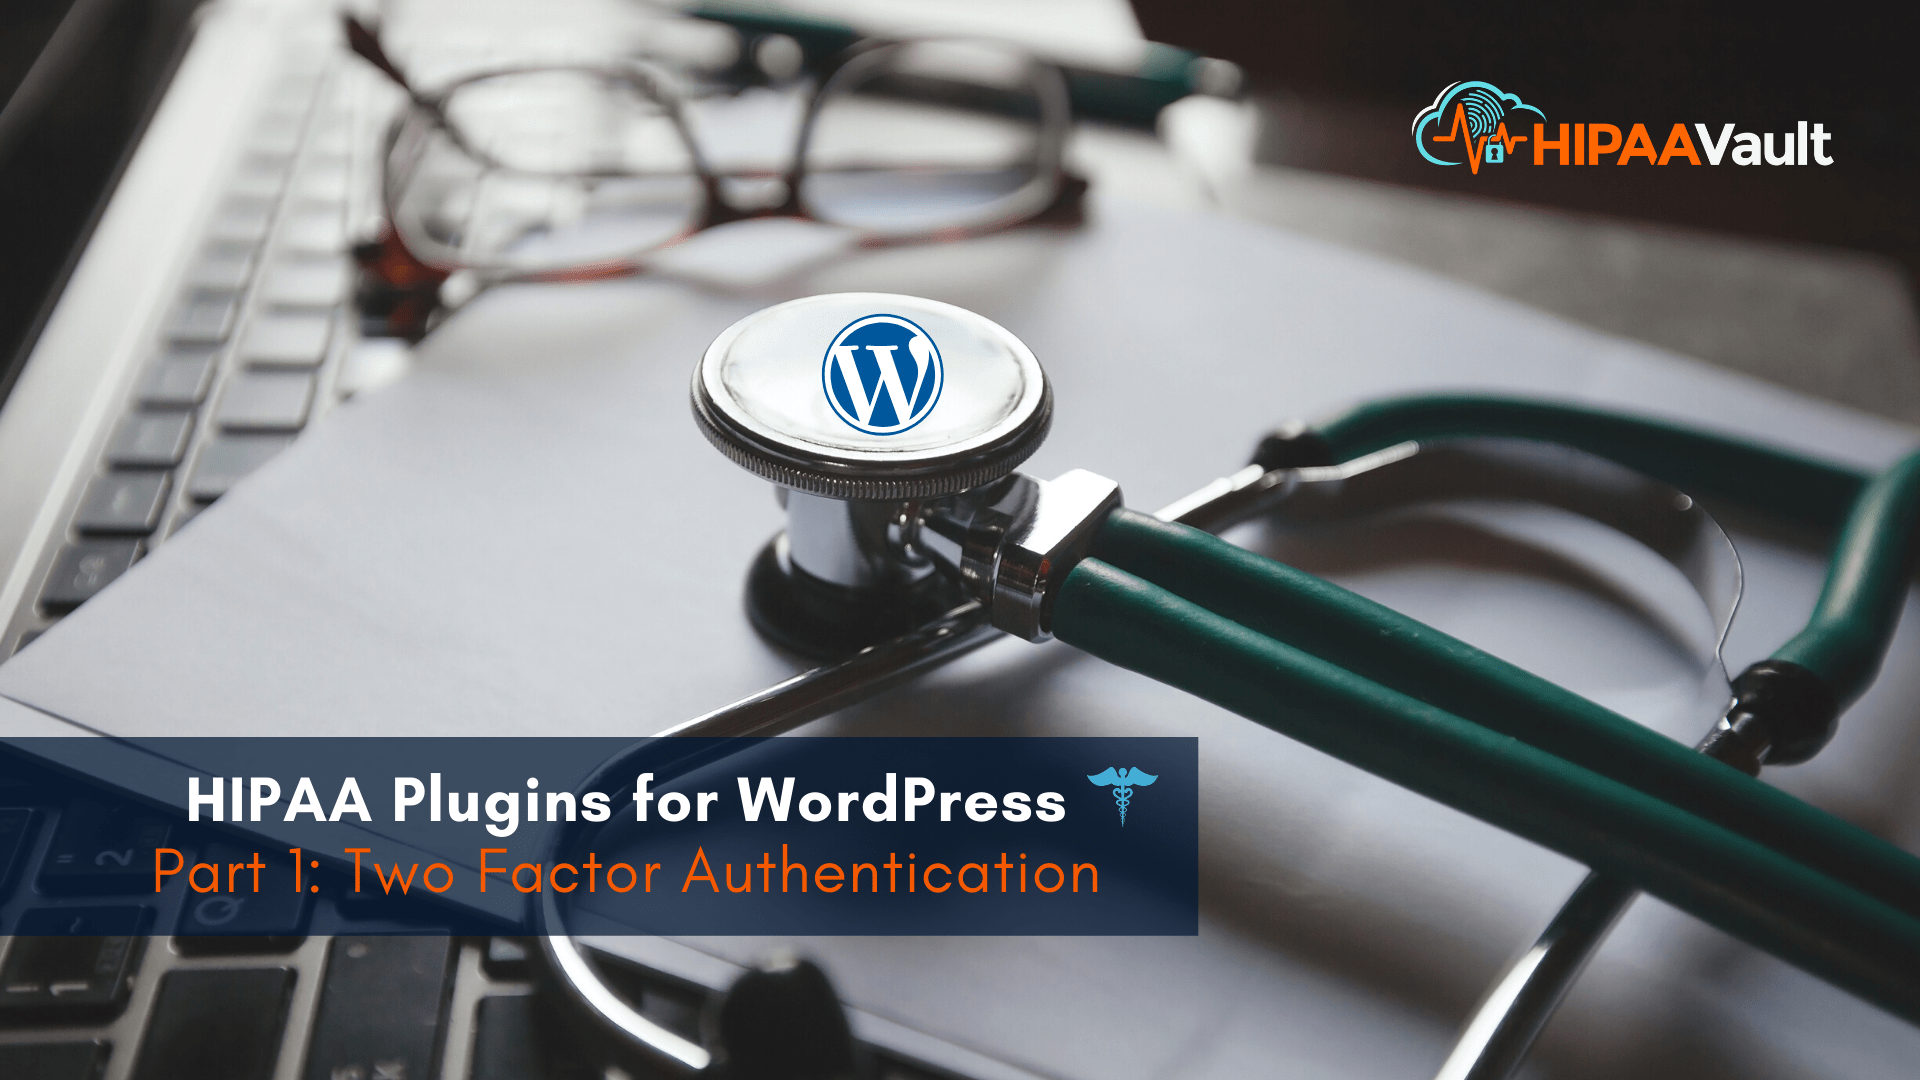 HIPAA Plugins for WordPress – Part 1: Two Factor Authentication